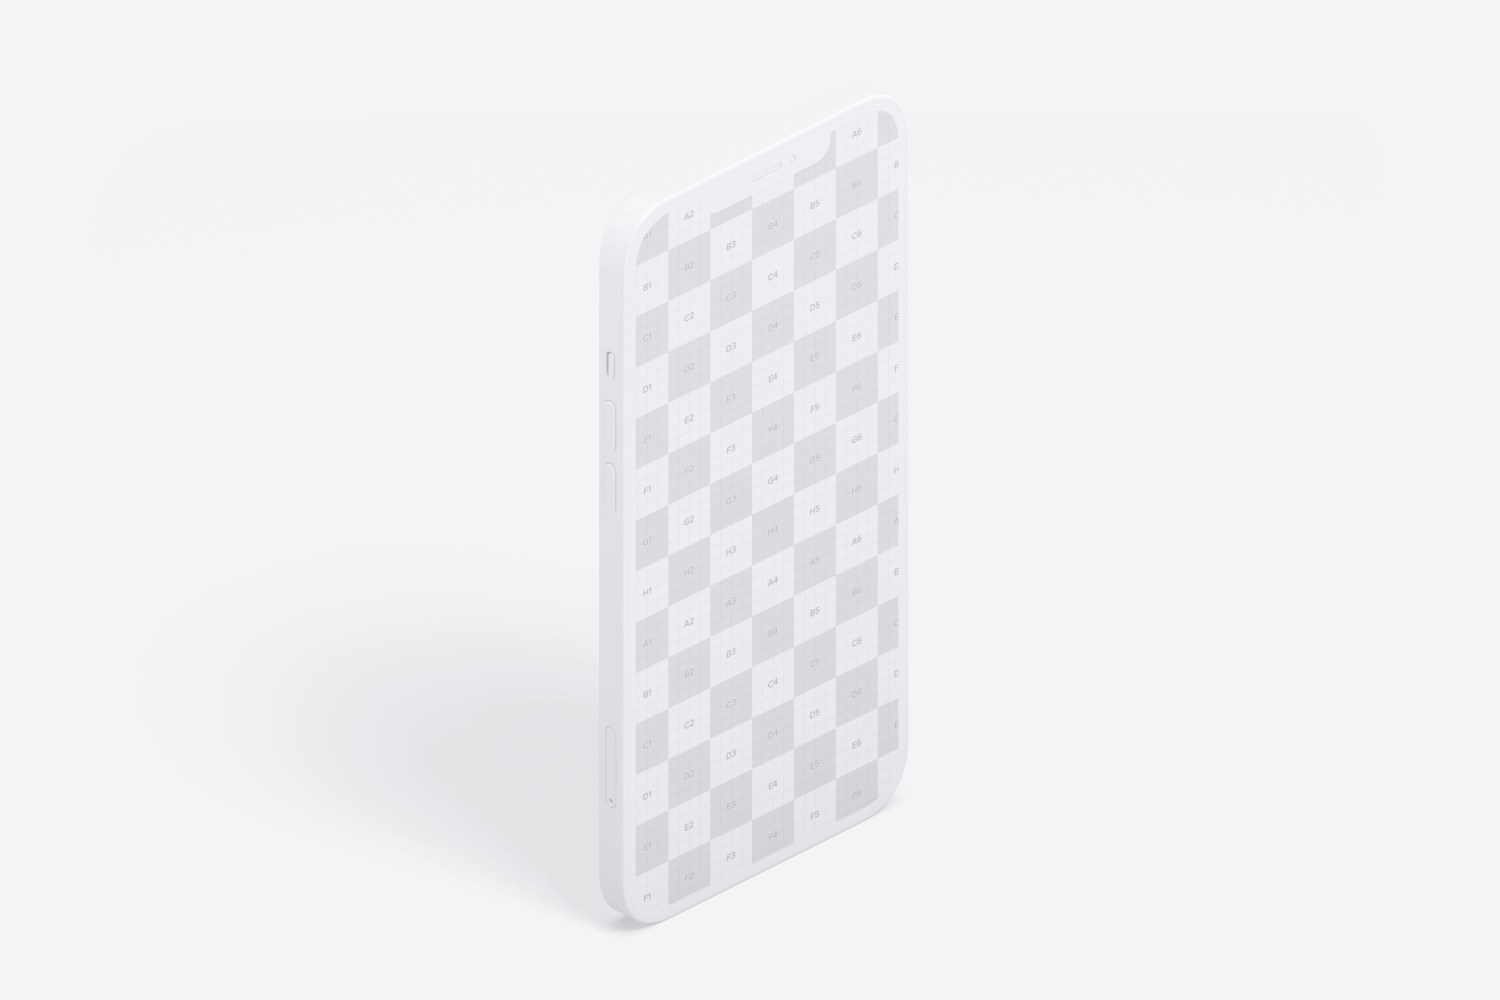 Isometric Clay iPhone 12 Mockup, Portrait Right View